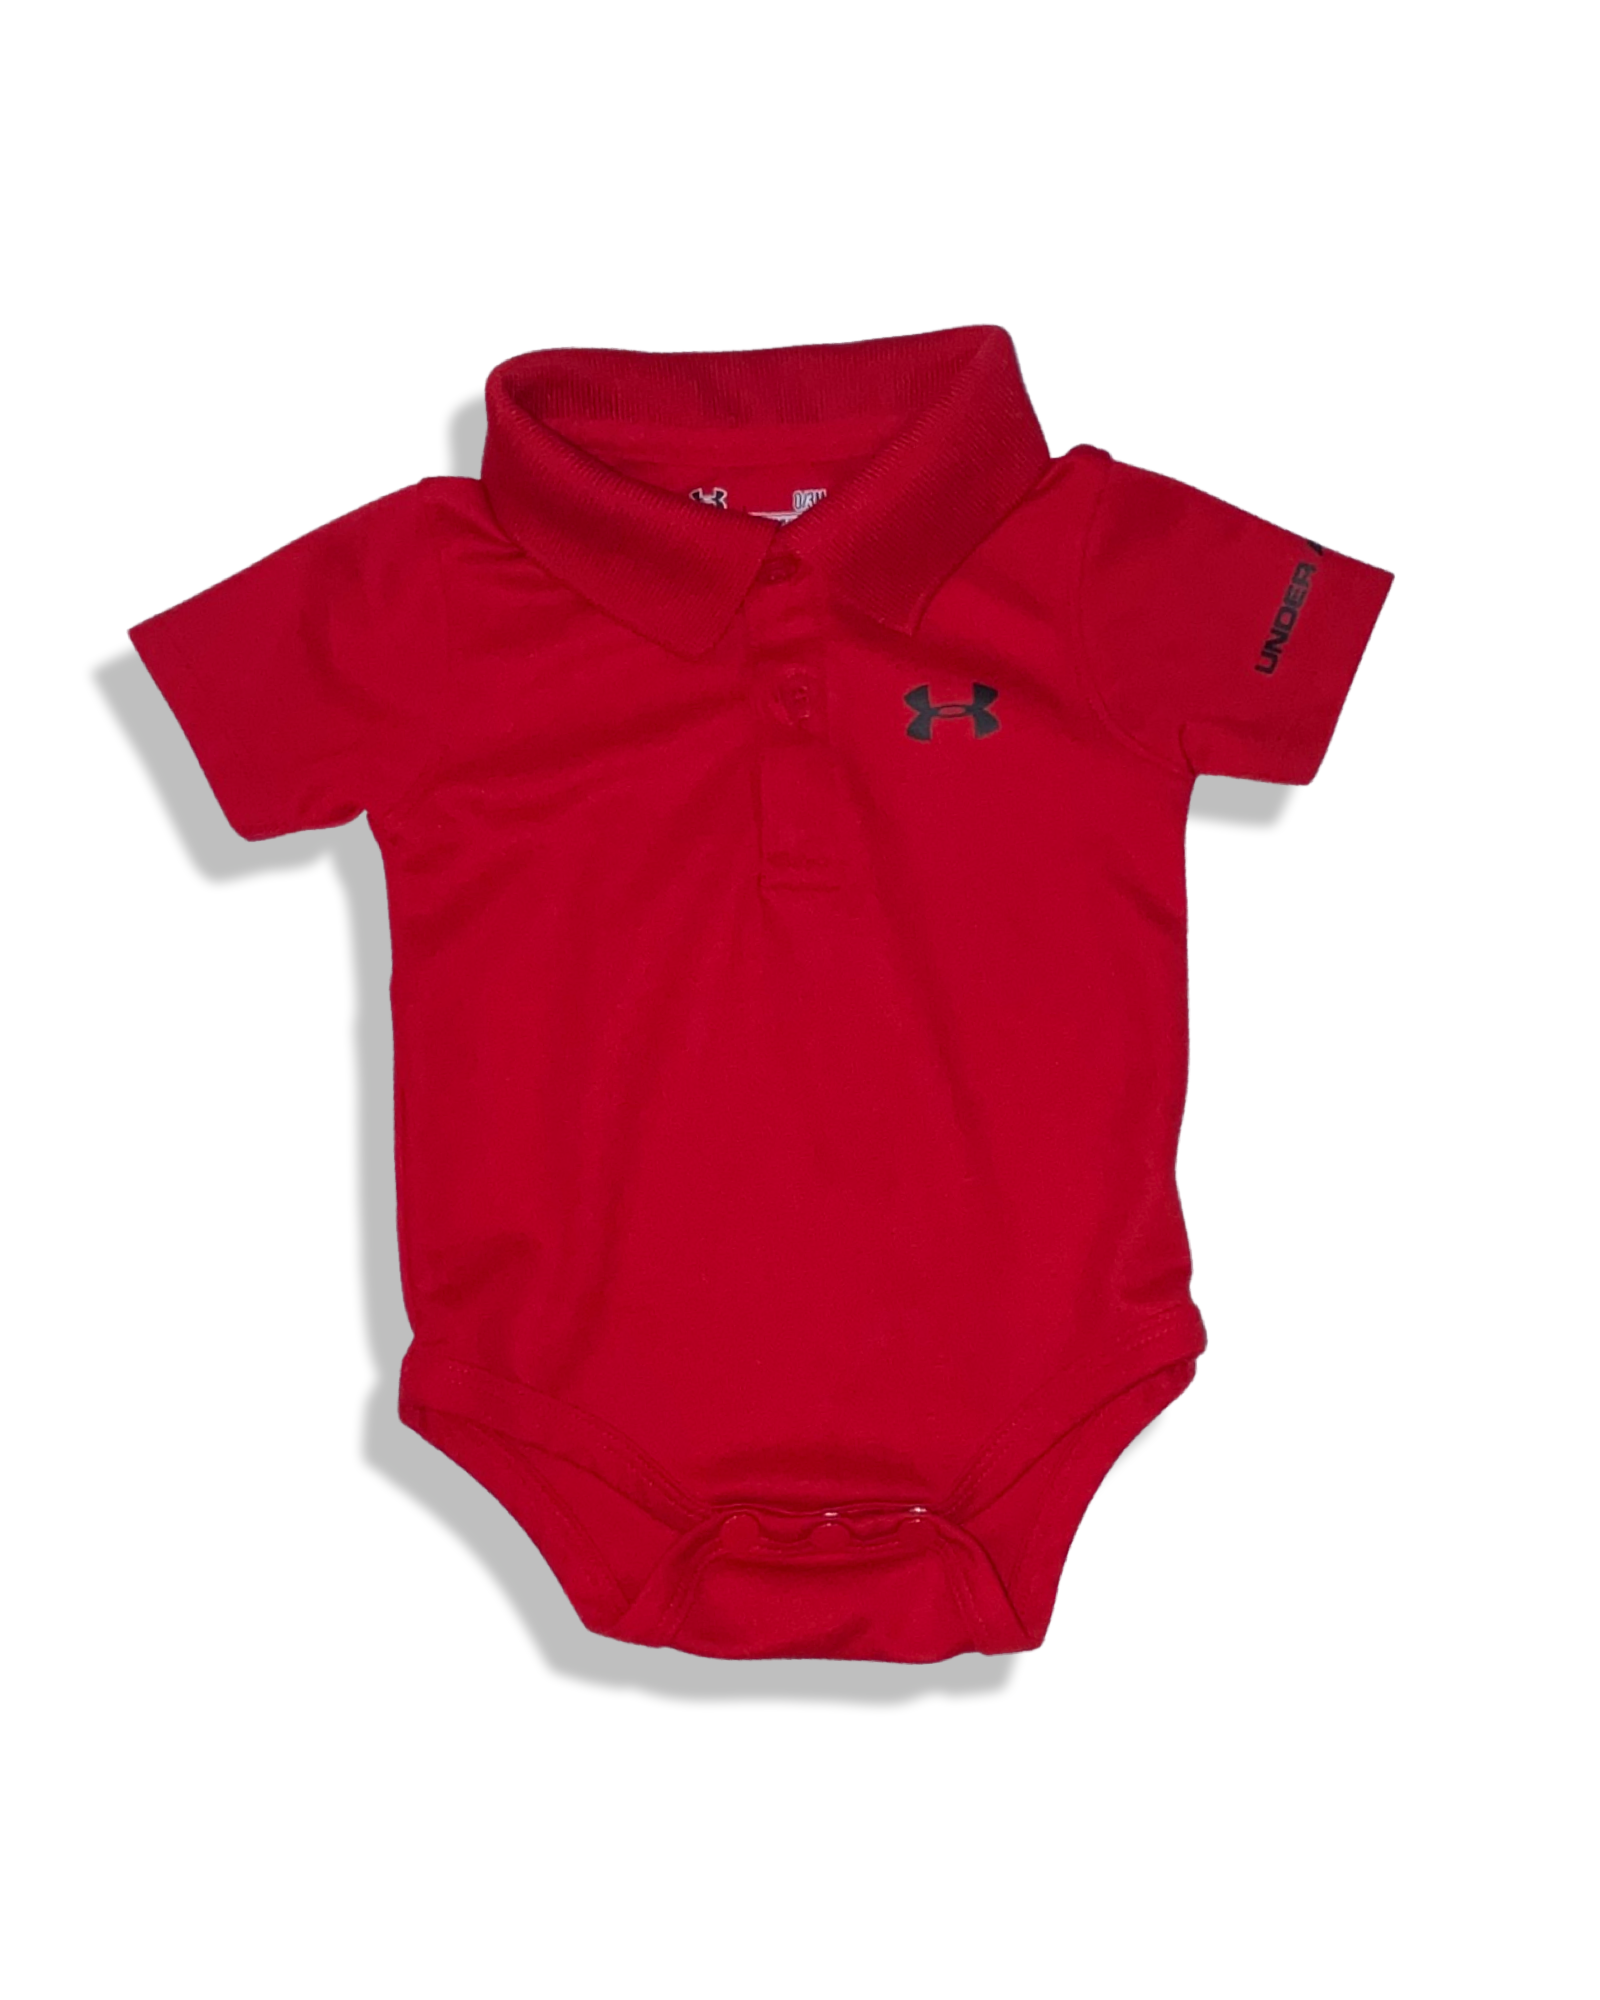 Under Armour Red Onesie with Collar Outfit (0-3M)